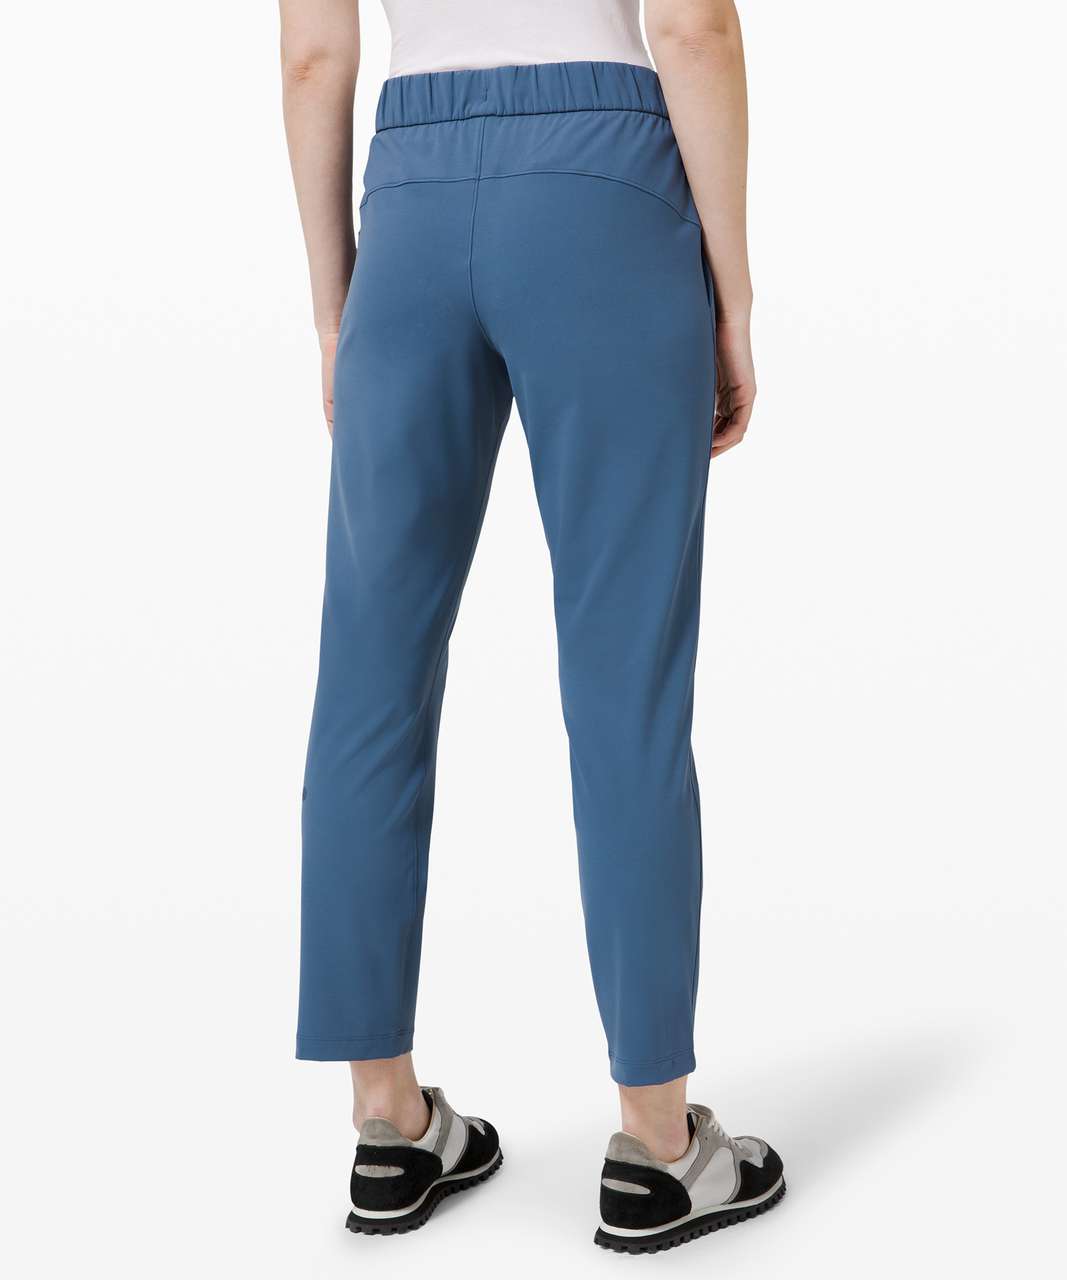 Lululemon On the Fly Pant Tall - Ink Blue